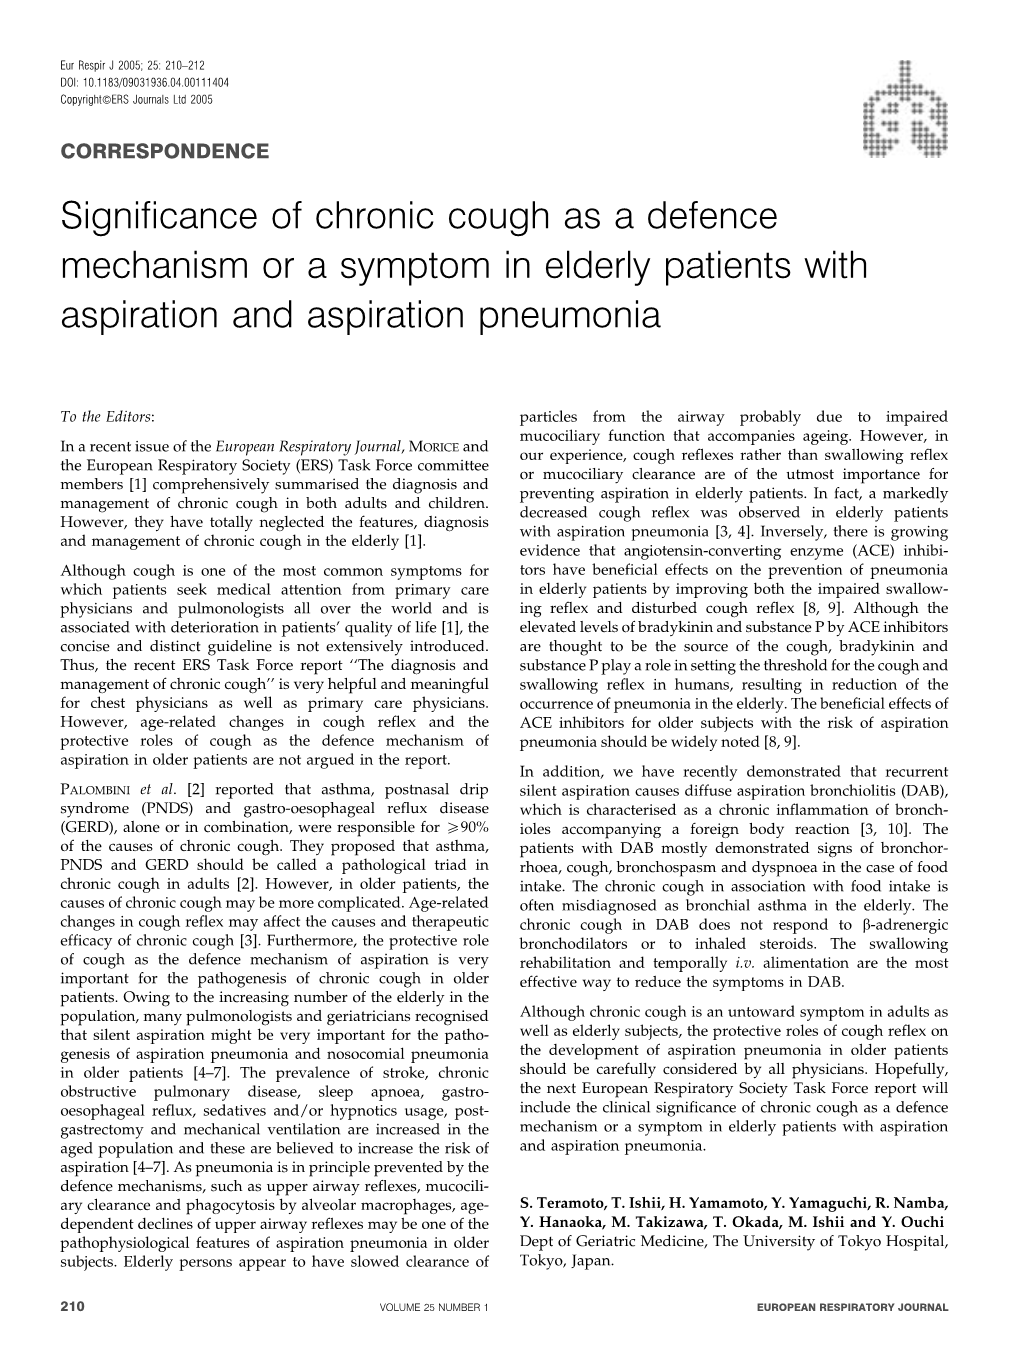 Significance of Chronic Cough As a Defence Mechanism Or a Symptom in Elderly Patients with Aspiration and Aspiration Pneumonia